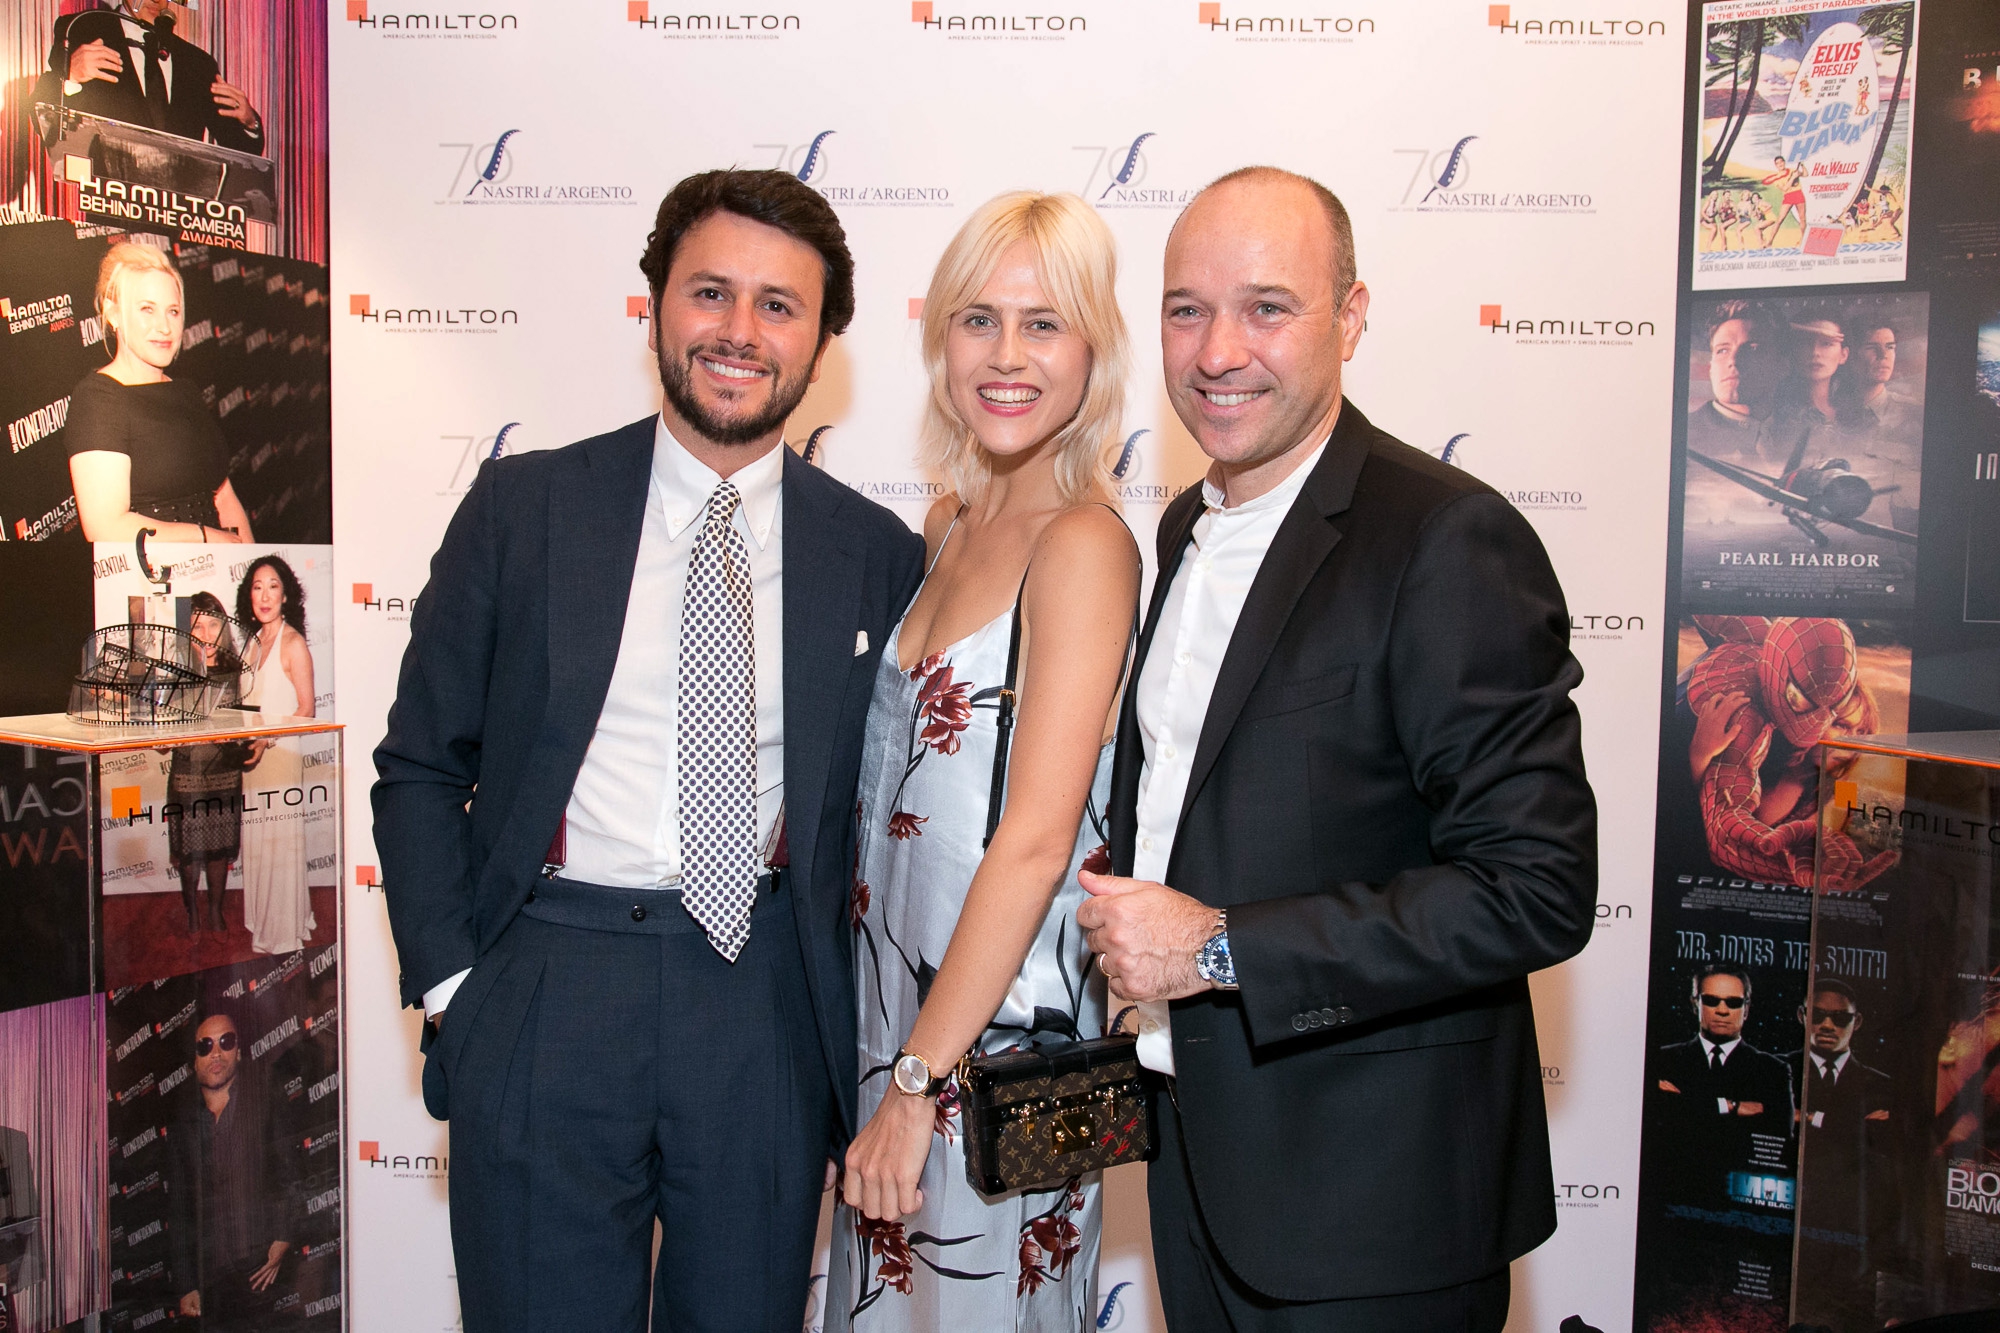 Hamilton Watches & Nastri d'Argento Hamilton strenghtens its bond to the Cinema industry, sponsoring the film festival organised by the Cinema Journalists Union